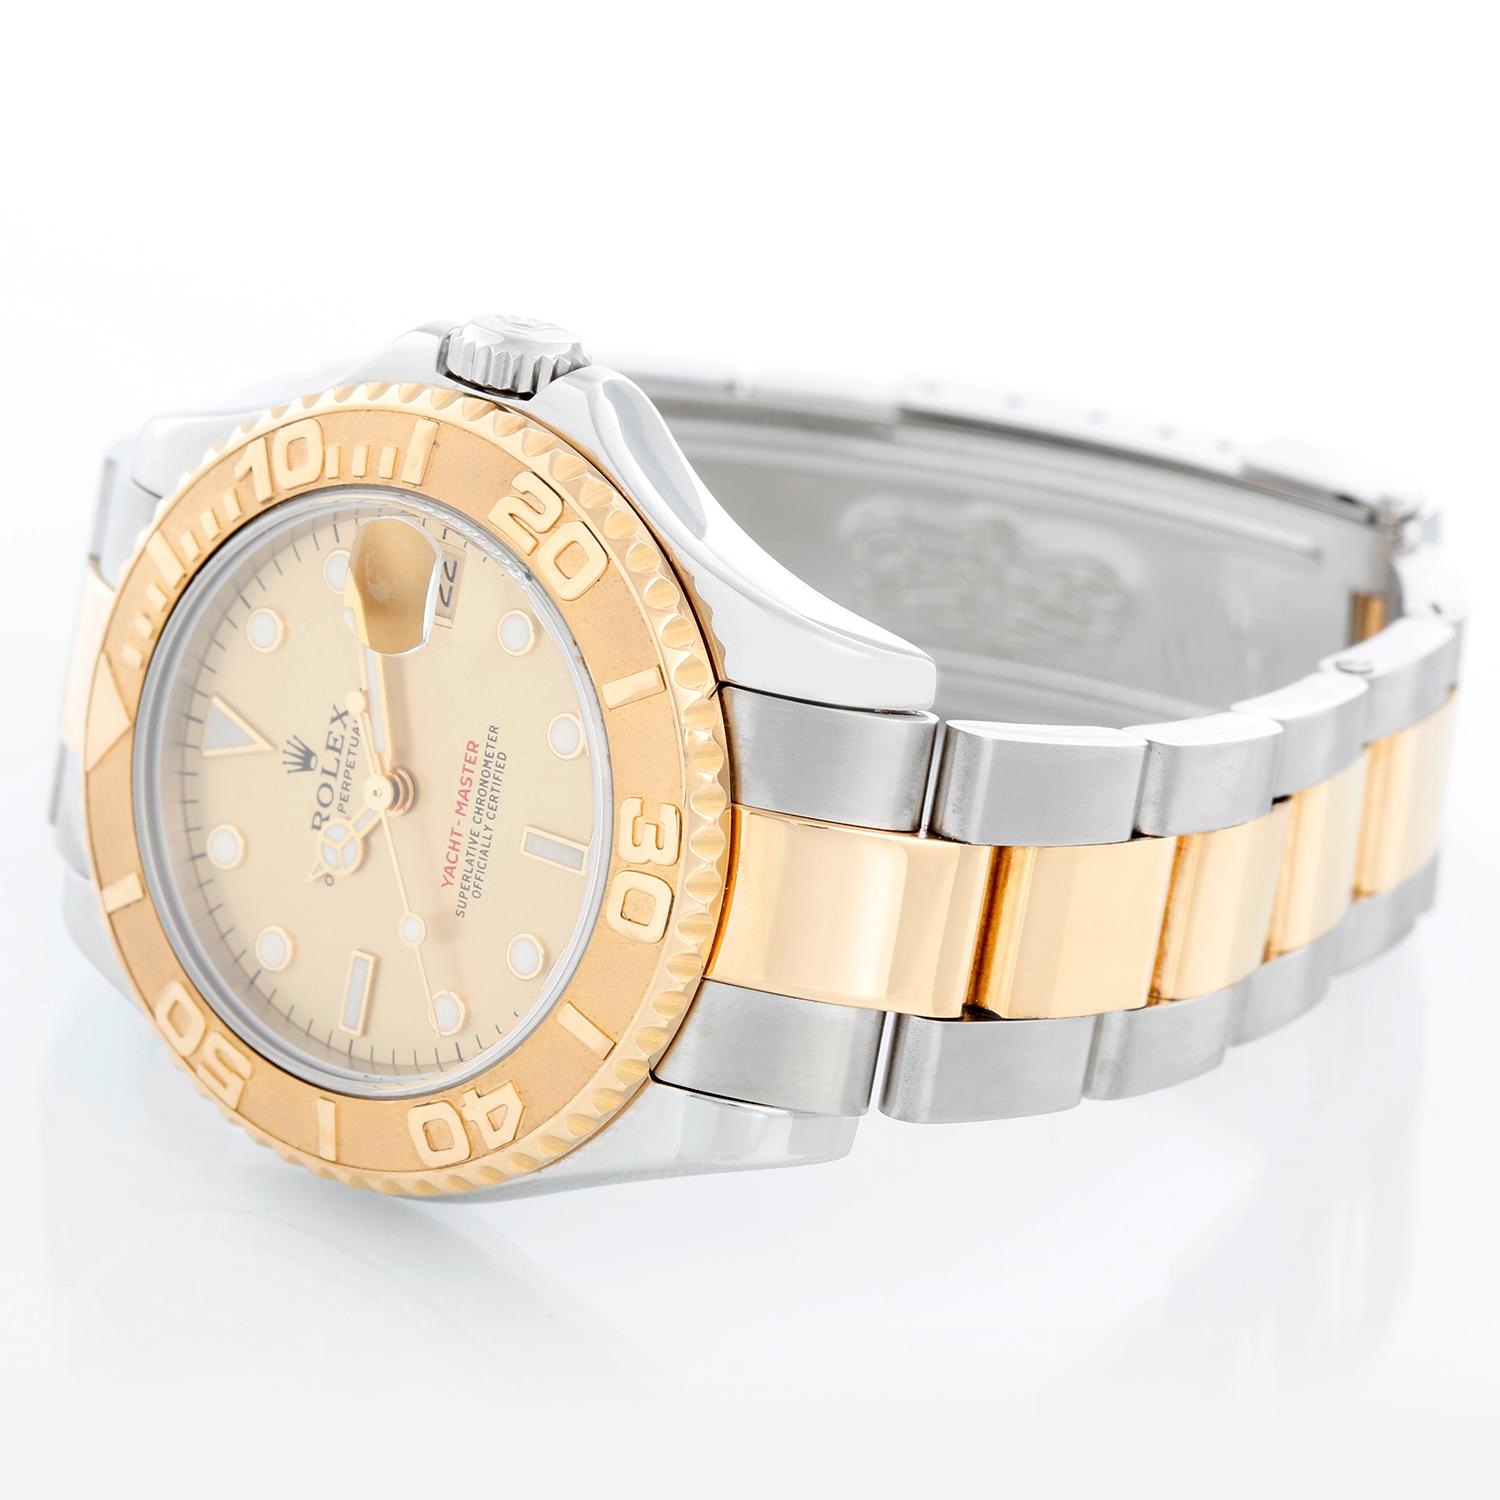 Rolex Midsize Yacht-Master 35mm Steel & Gold Men's or Ladies Watch 168623 - Automatic winding; sapphire crystal. Stainless steel case with 18k yellow gold bezel . Champagne dial. Stainless steel and 18k yellow gold Oyster bracelet with flip-lock